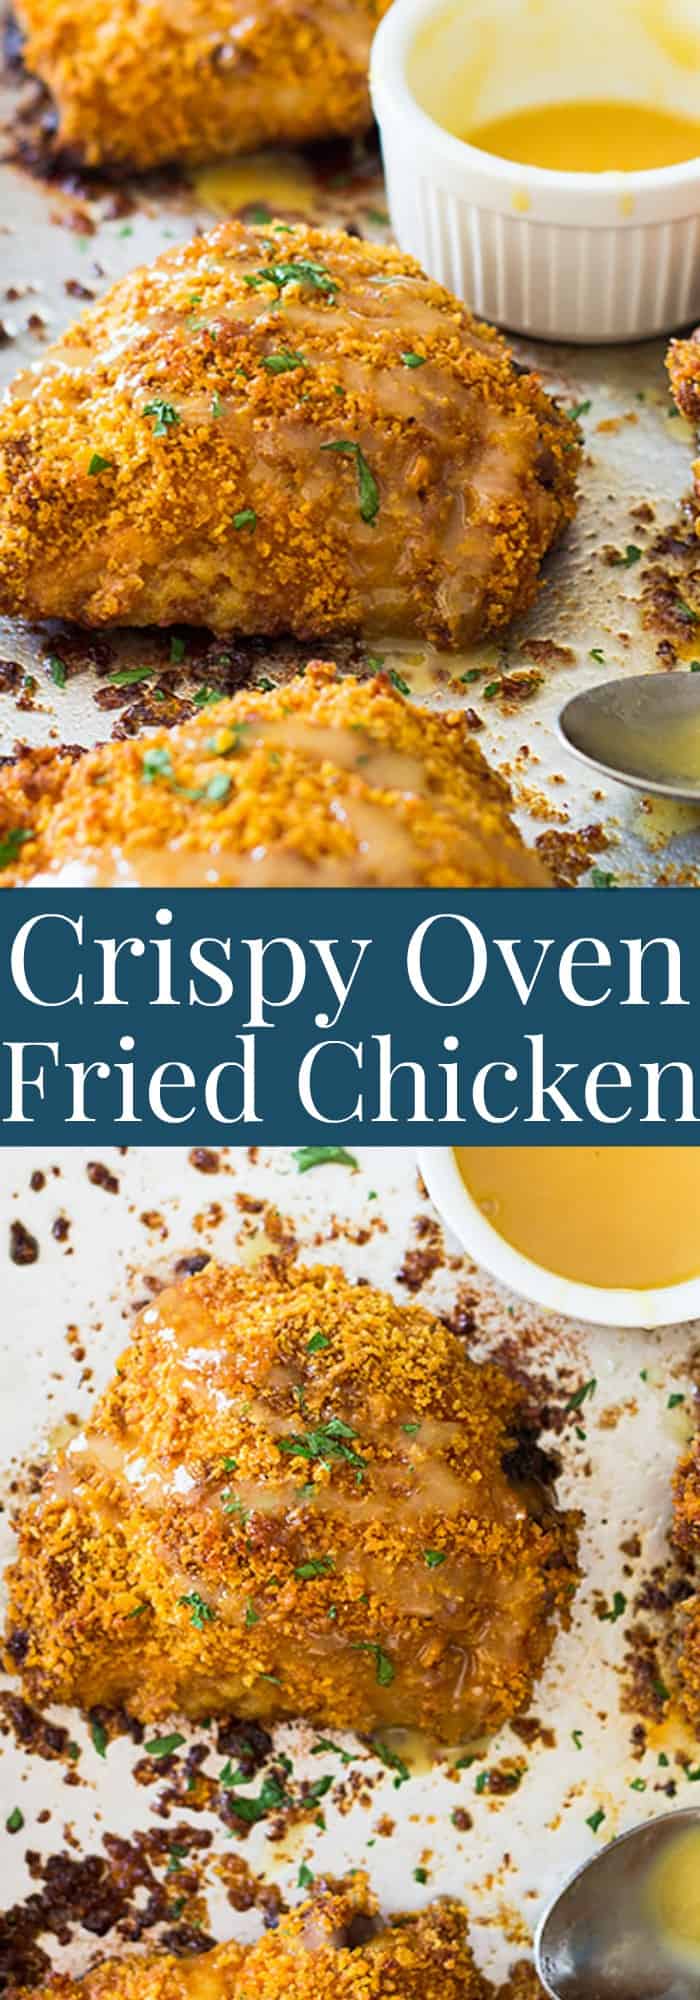 These Crispy Oven Fried Chicken Thighs are a great way to enjoy fried chicken in a healthier way! | www.countrysidecravings.com